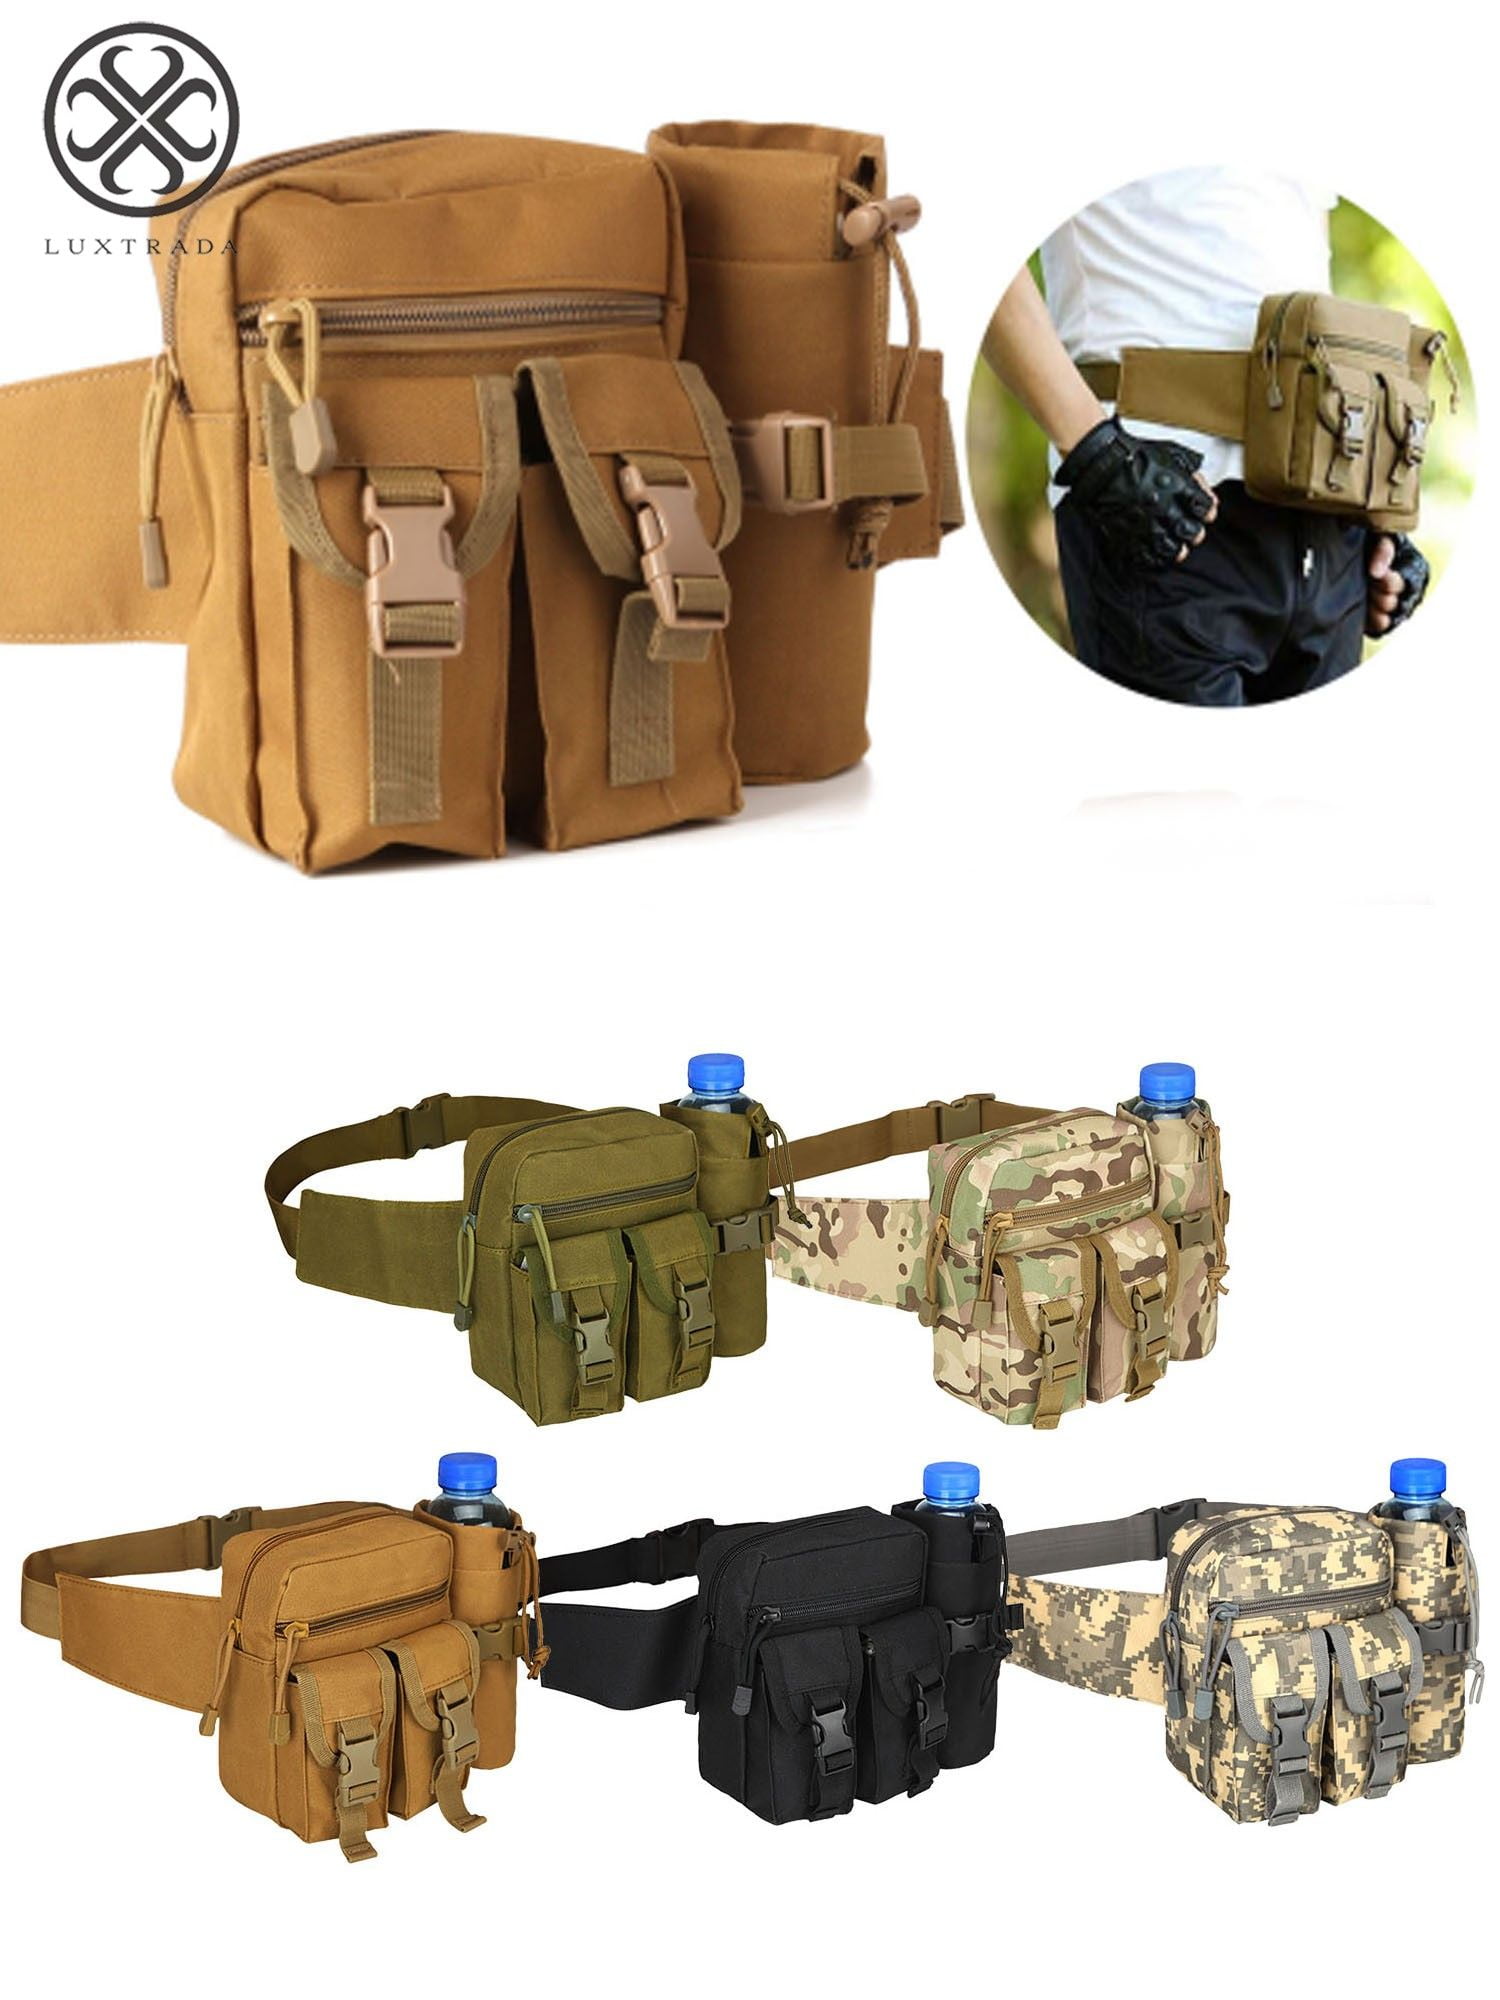 Outdoor Waterproof Tactical Bag Waist Fanny Pack Camping Military Army Bag Pouch 